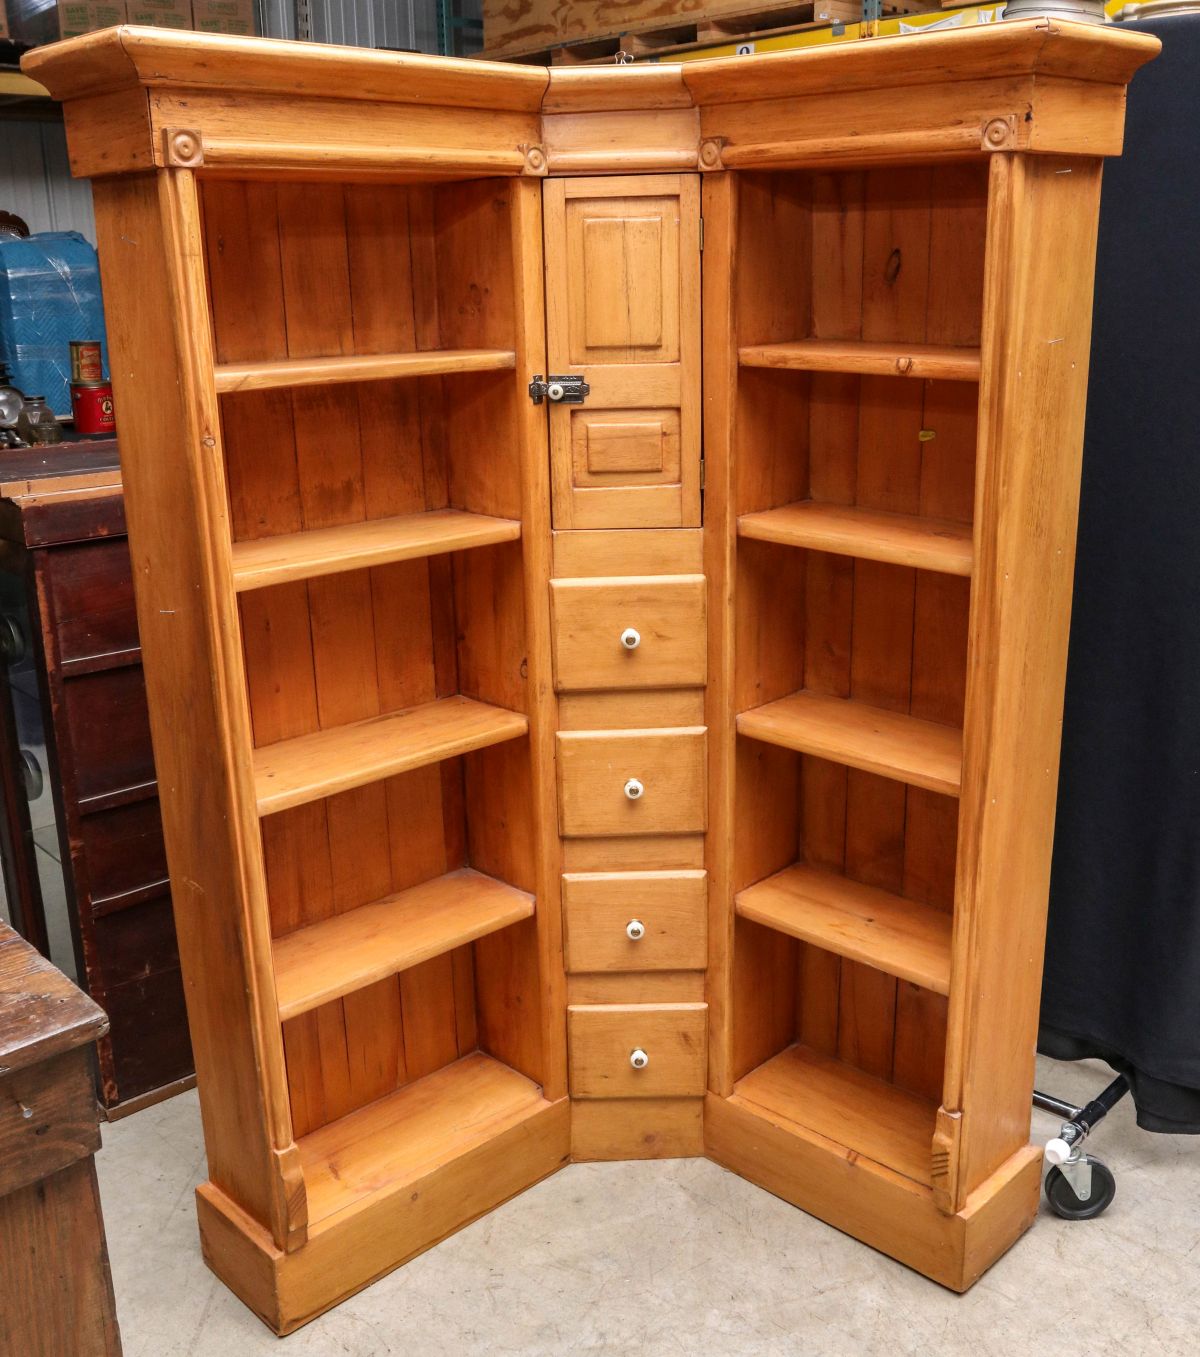 AN INTERESTING PINE CORNER DISPLAY CABINET WITH DRAWERS